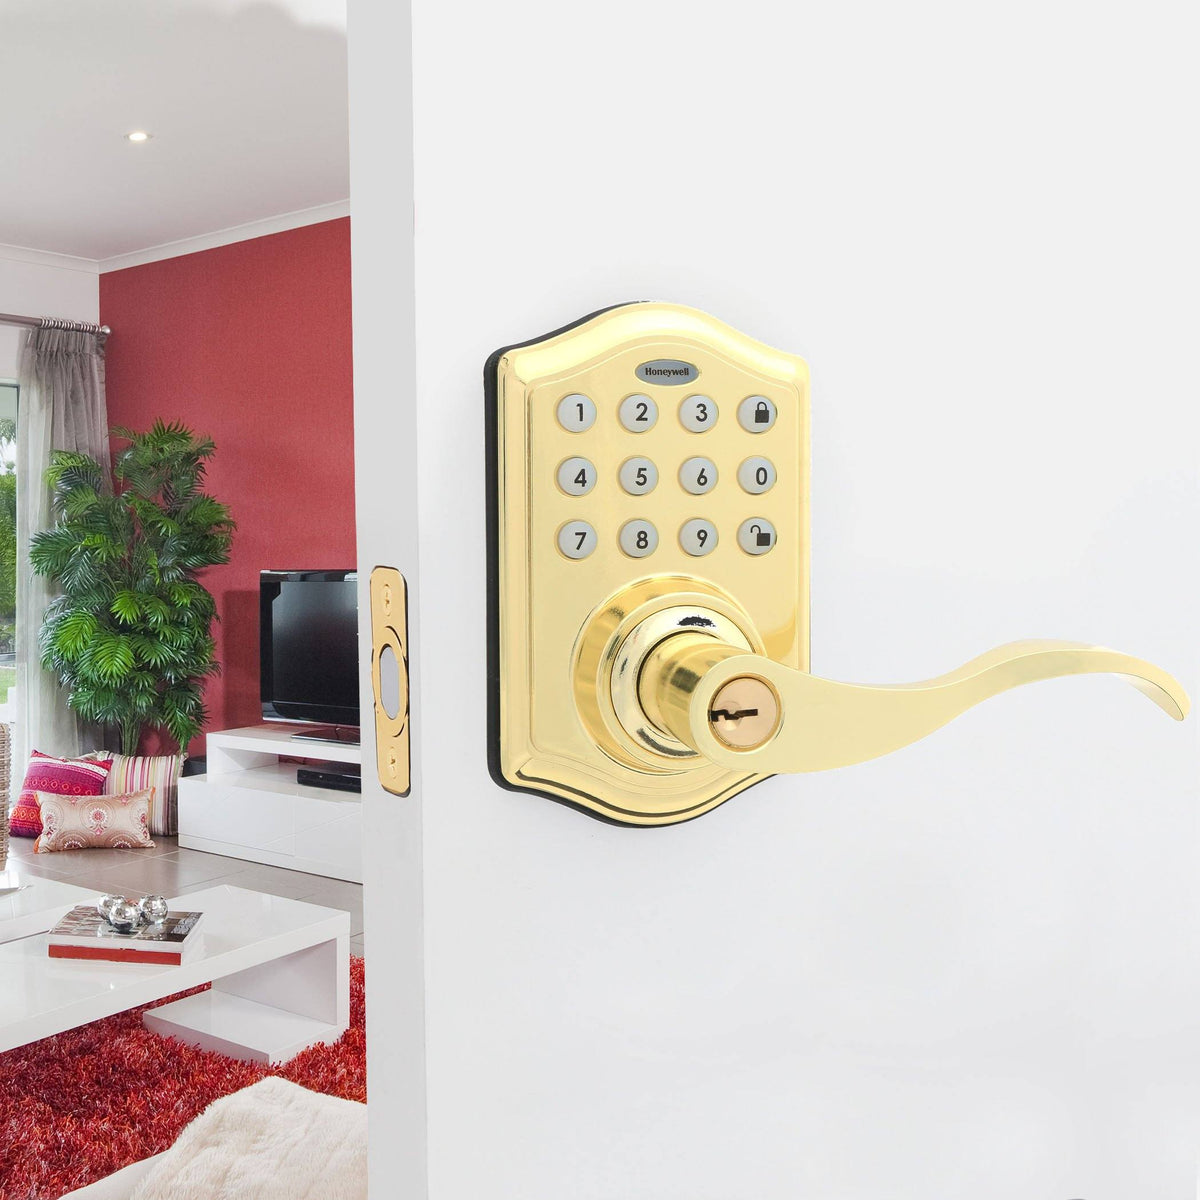 Honeywell 8734001 Electronic Entry Lever Door Lock with Keypad Polished Brass Finish Installed on Door